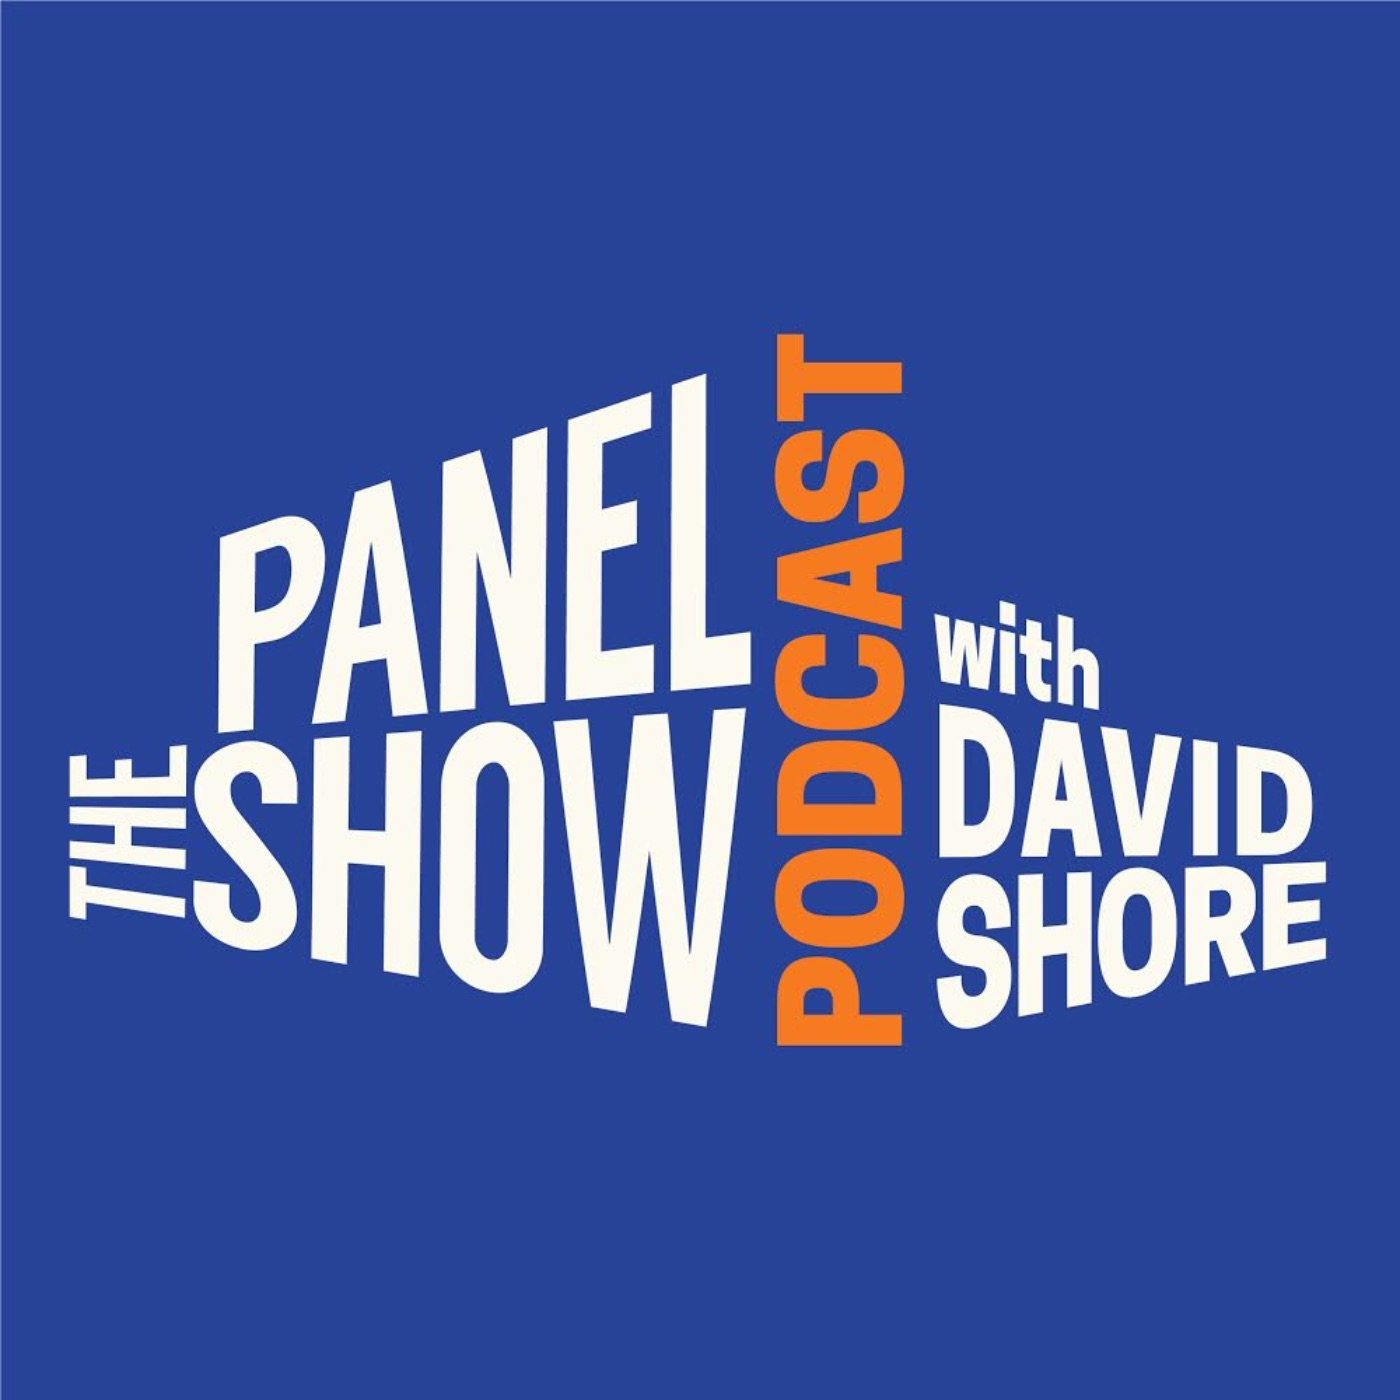 Artwork for podcast The Panel Show with David Shore